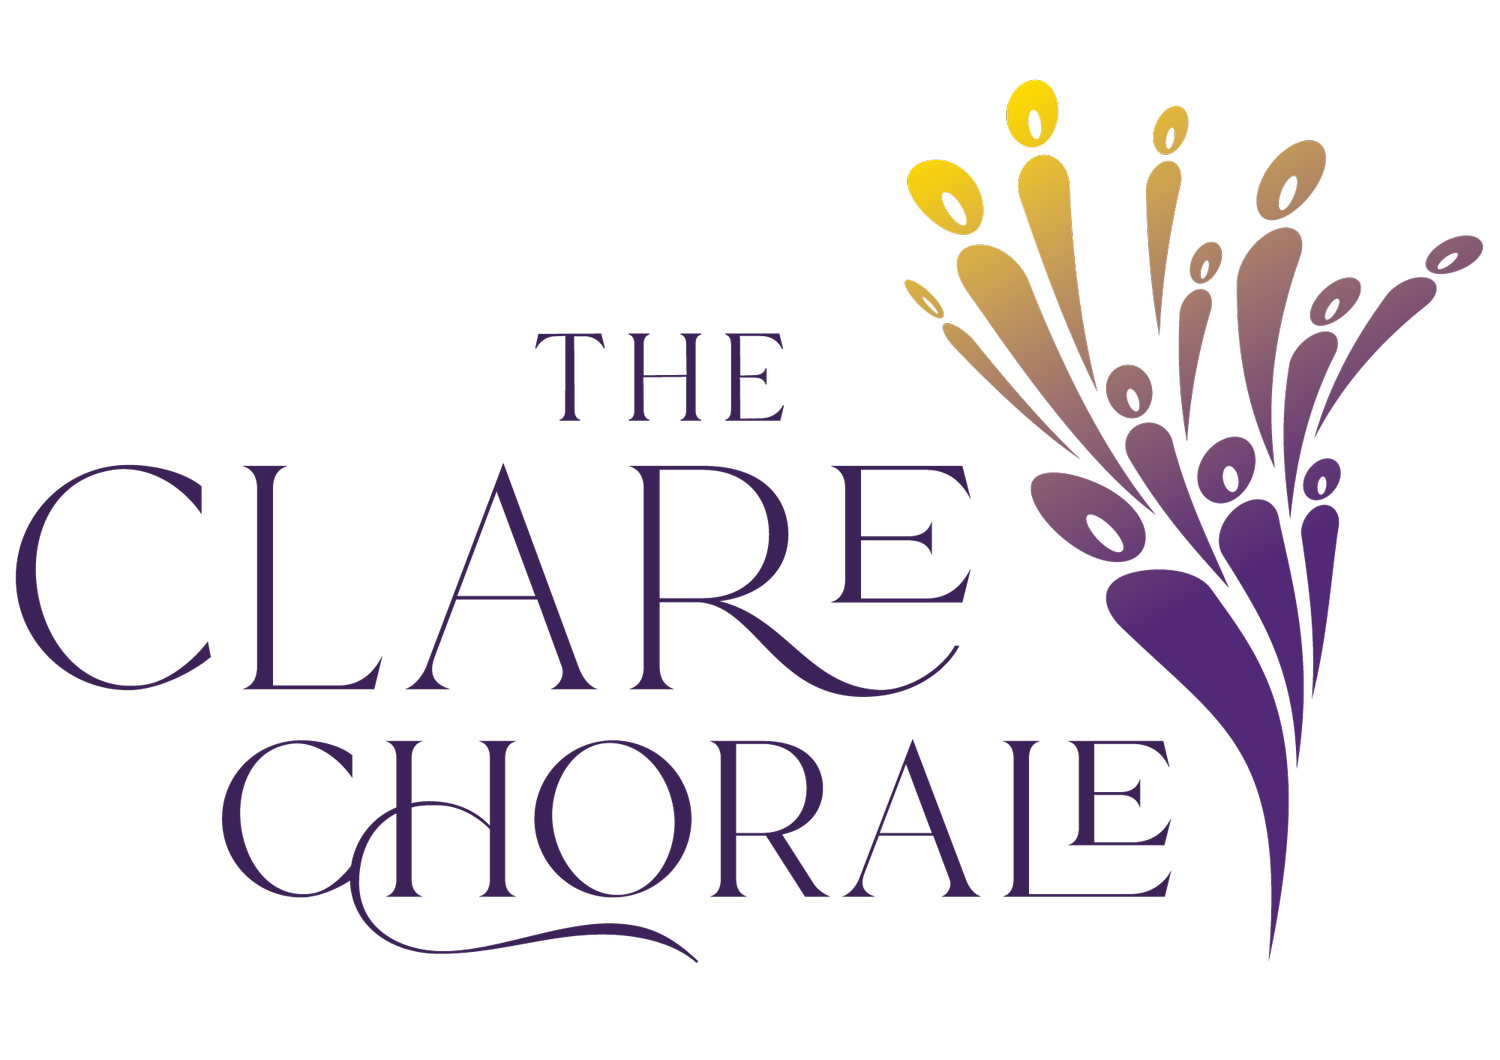 The Clare Chorale